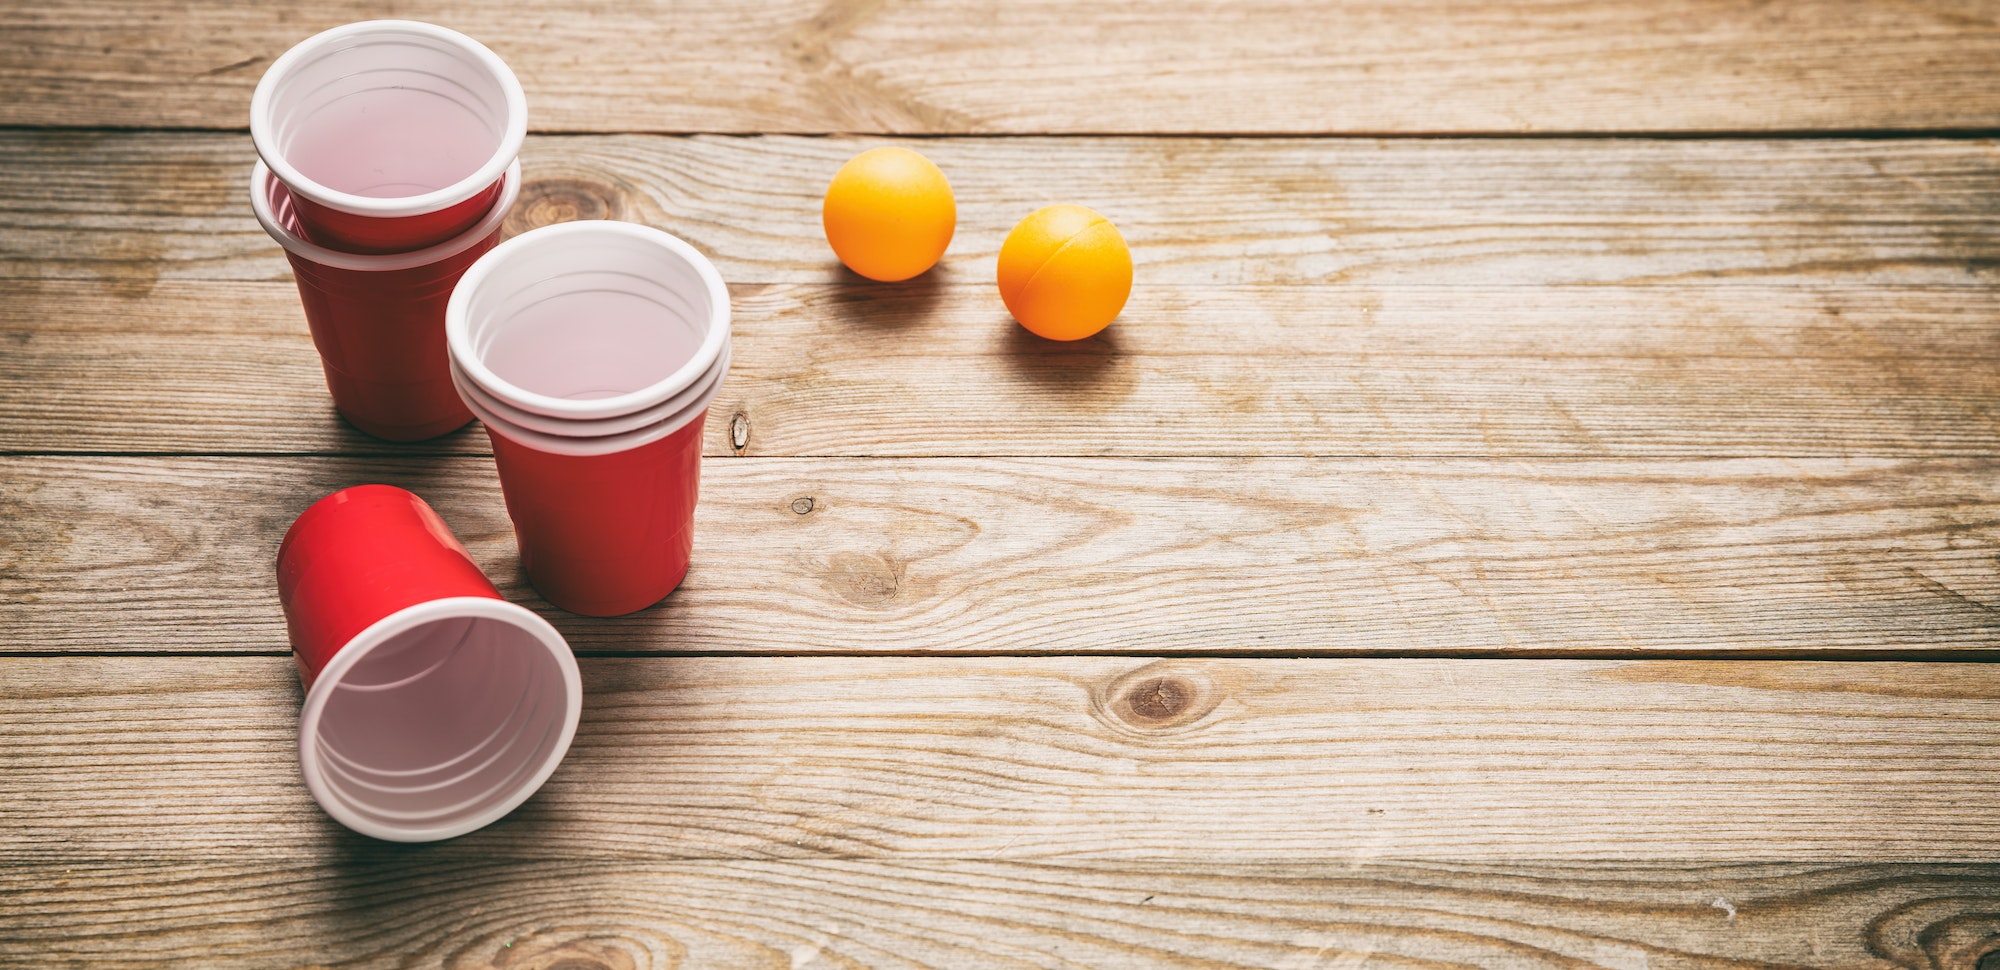 Beer pong. Plastic red color cups and ping pong balls on wooden background